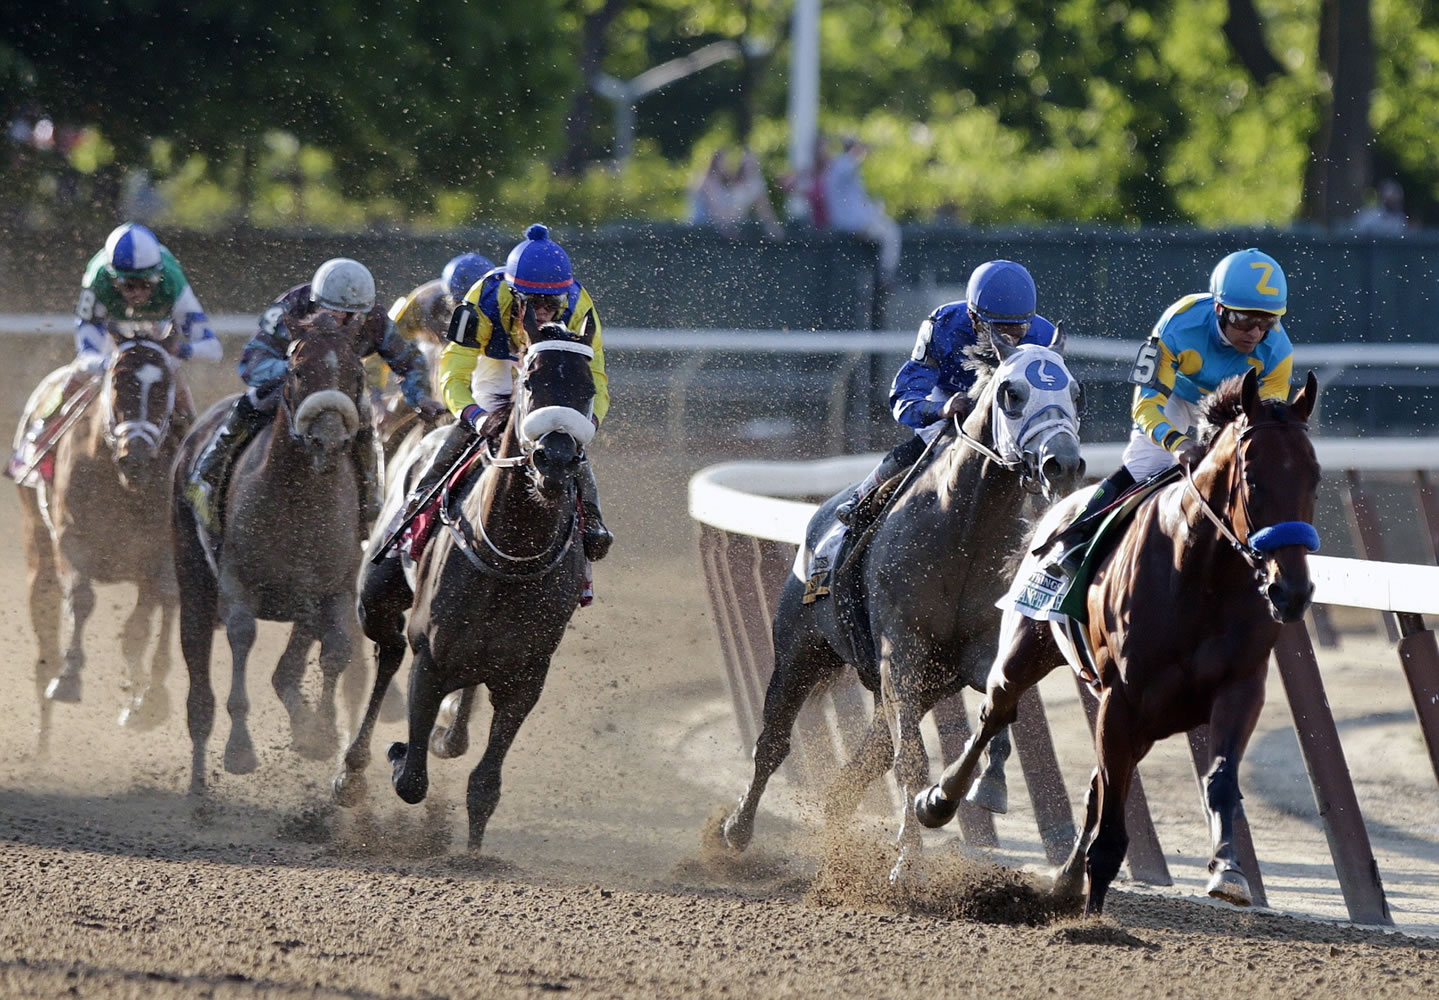 American Pharoah, with jockey Victor Espinoza, at right in blue and yellow, rounds the fourth turn ahead of the field at the Belmont Stakes on Saturday in Elmont, N.Y.